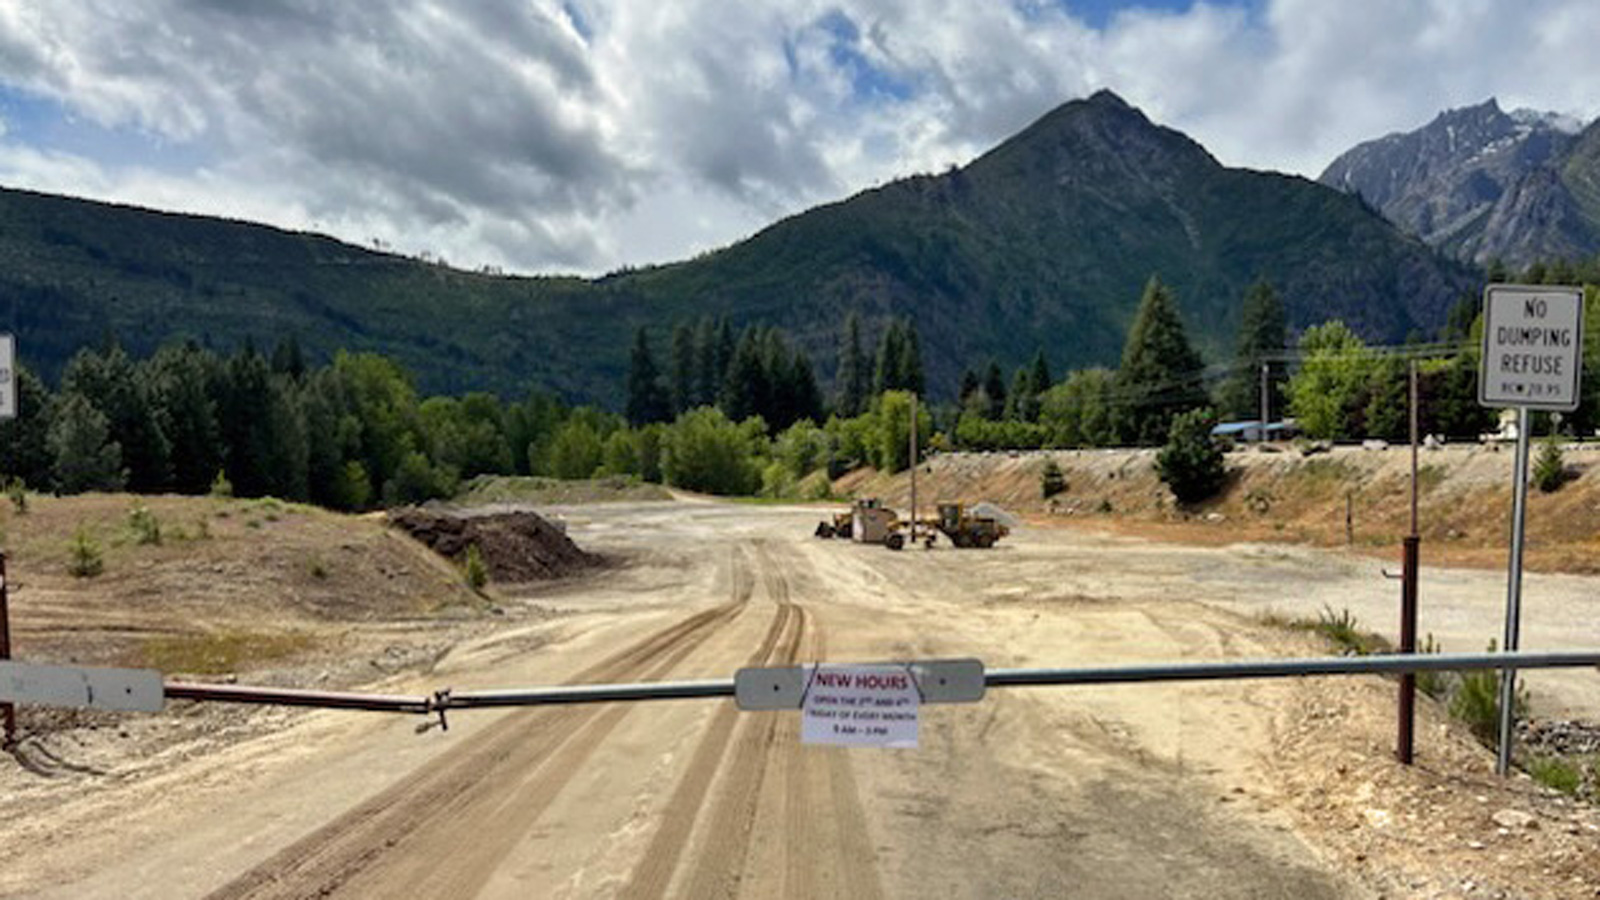 Reduced hours at Leavenworth brush site